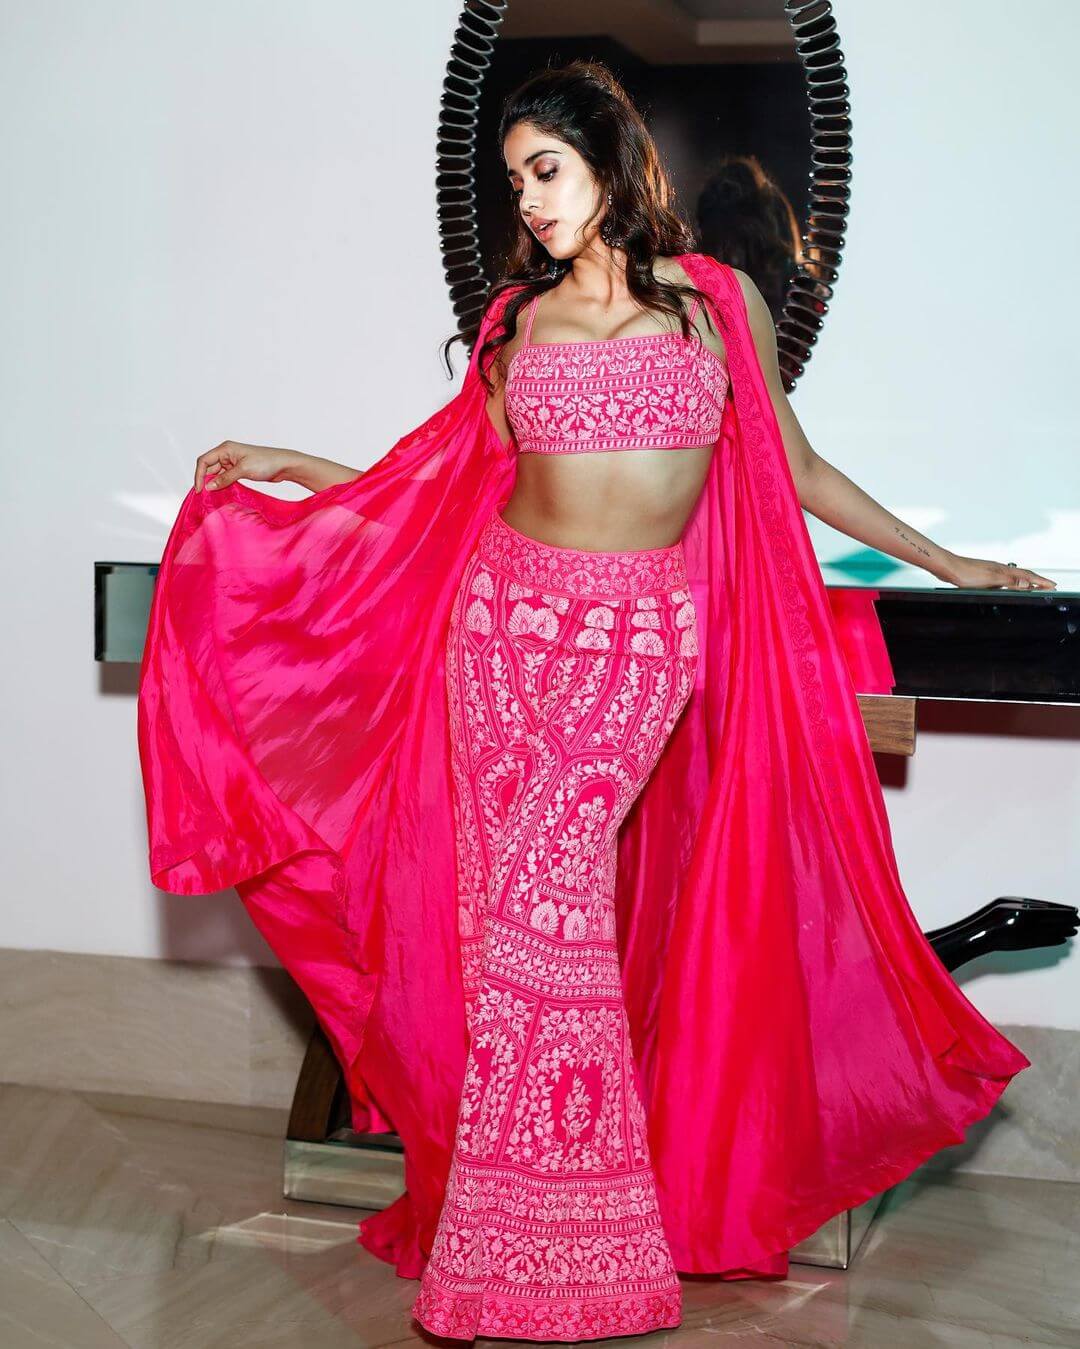 Janhvi Kapoor's Breathtaking Look In Pink Colored Two-Piece Set